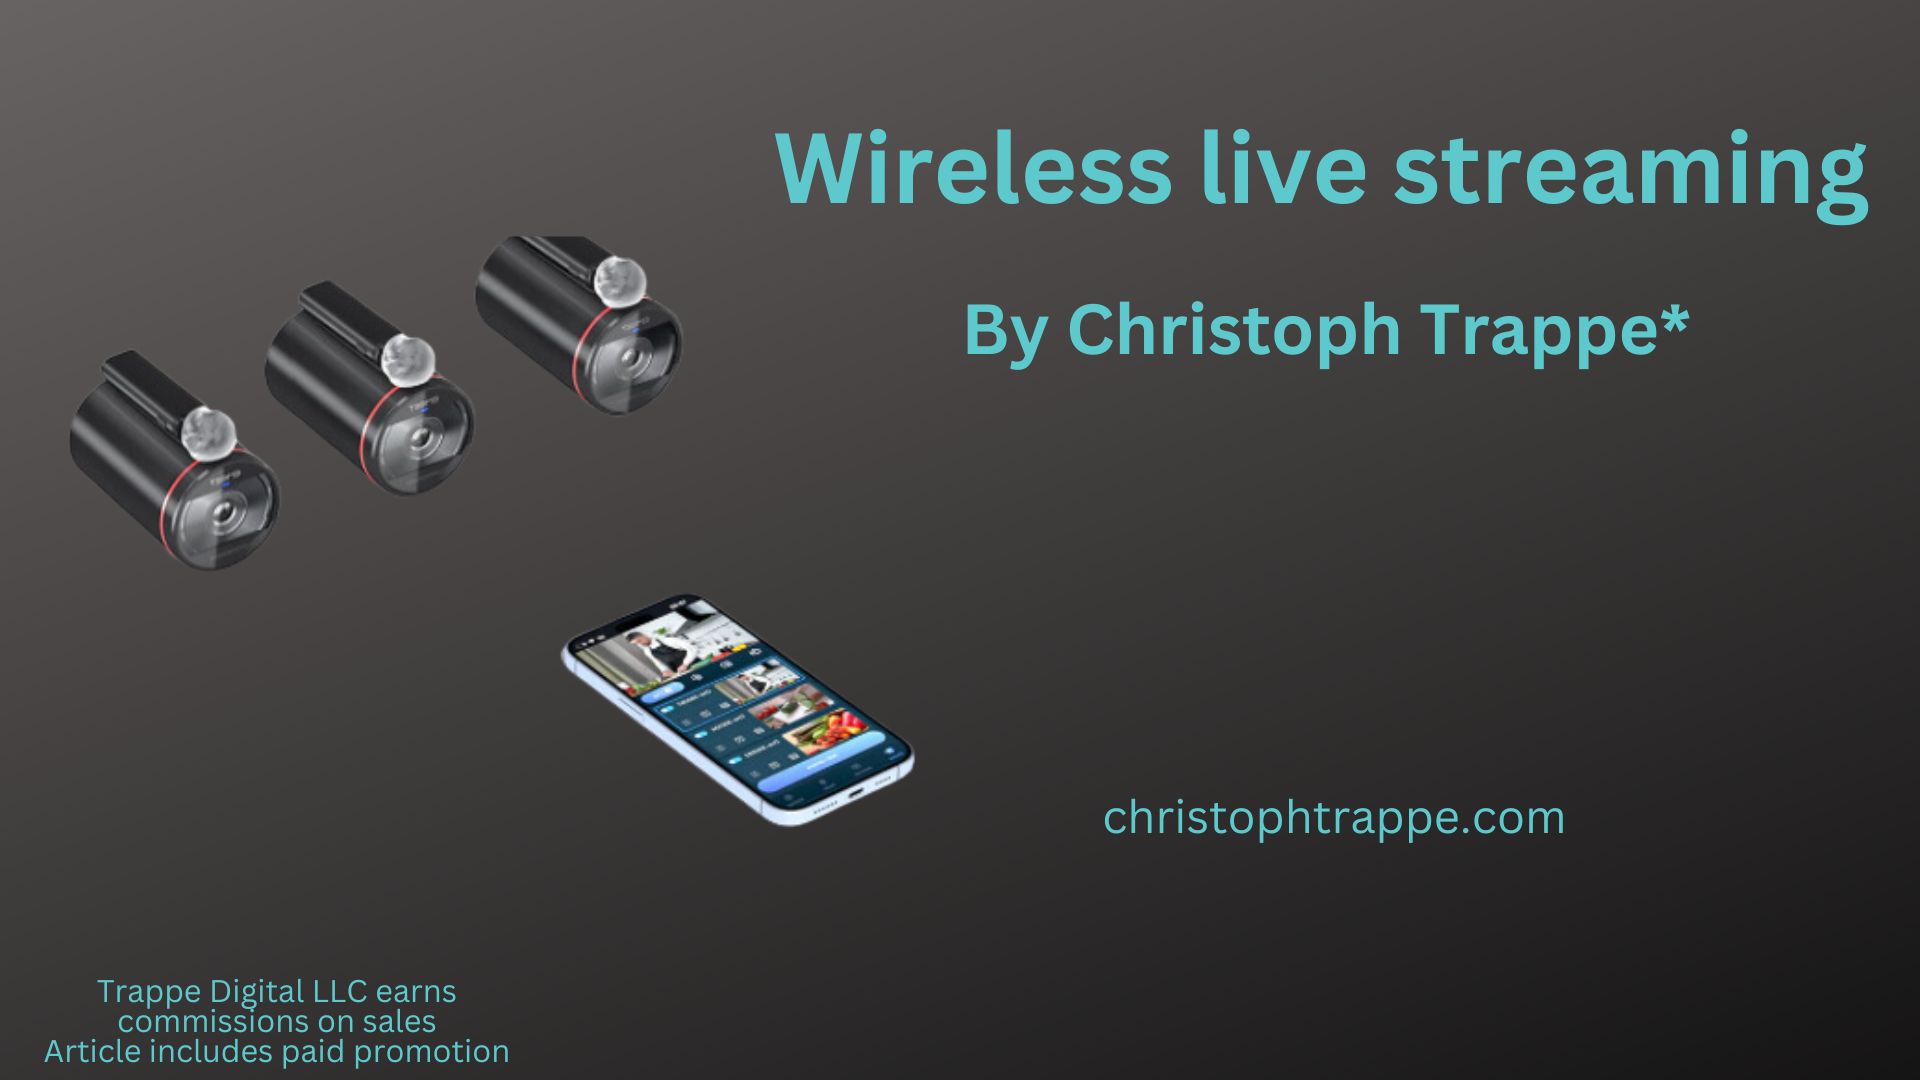 Lights, Camera, Wireless Action Using a wireless live streaming camera